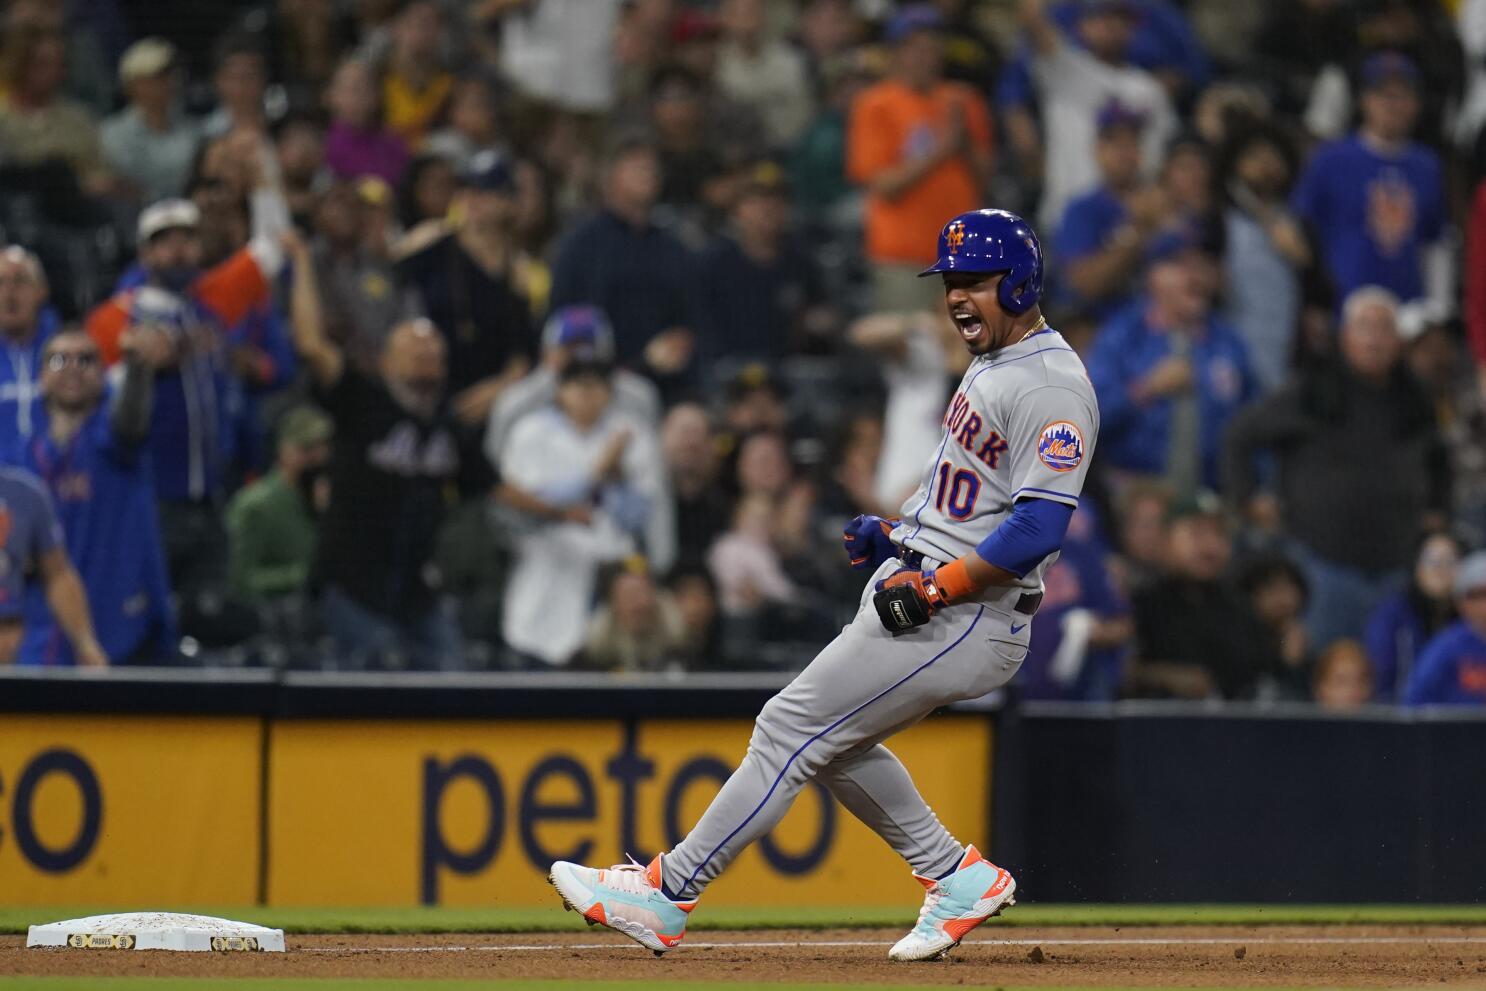 Escobar hits Mets' first cycle since 2012 in win over Padres